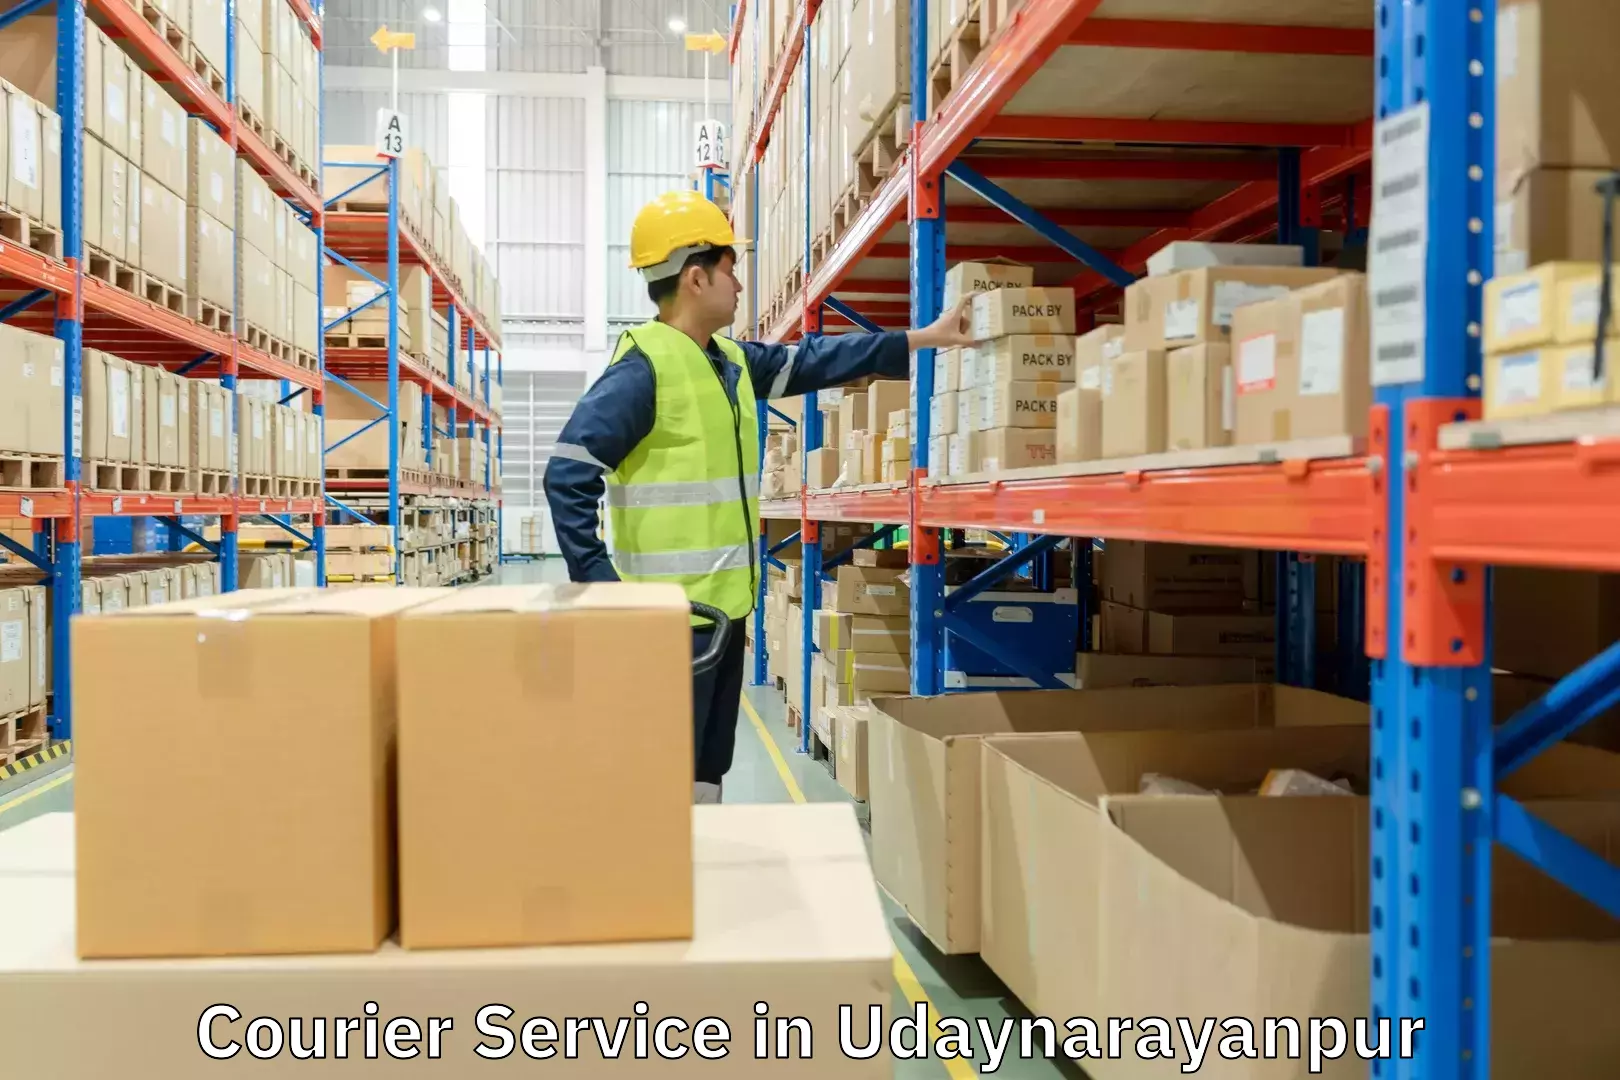 Courier service partnerships in Udaynarayanpur